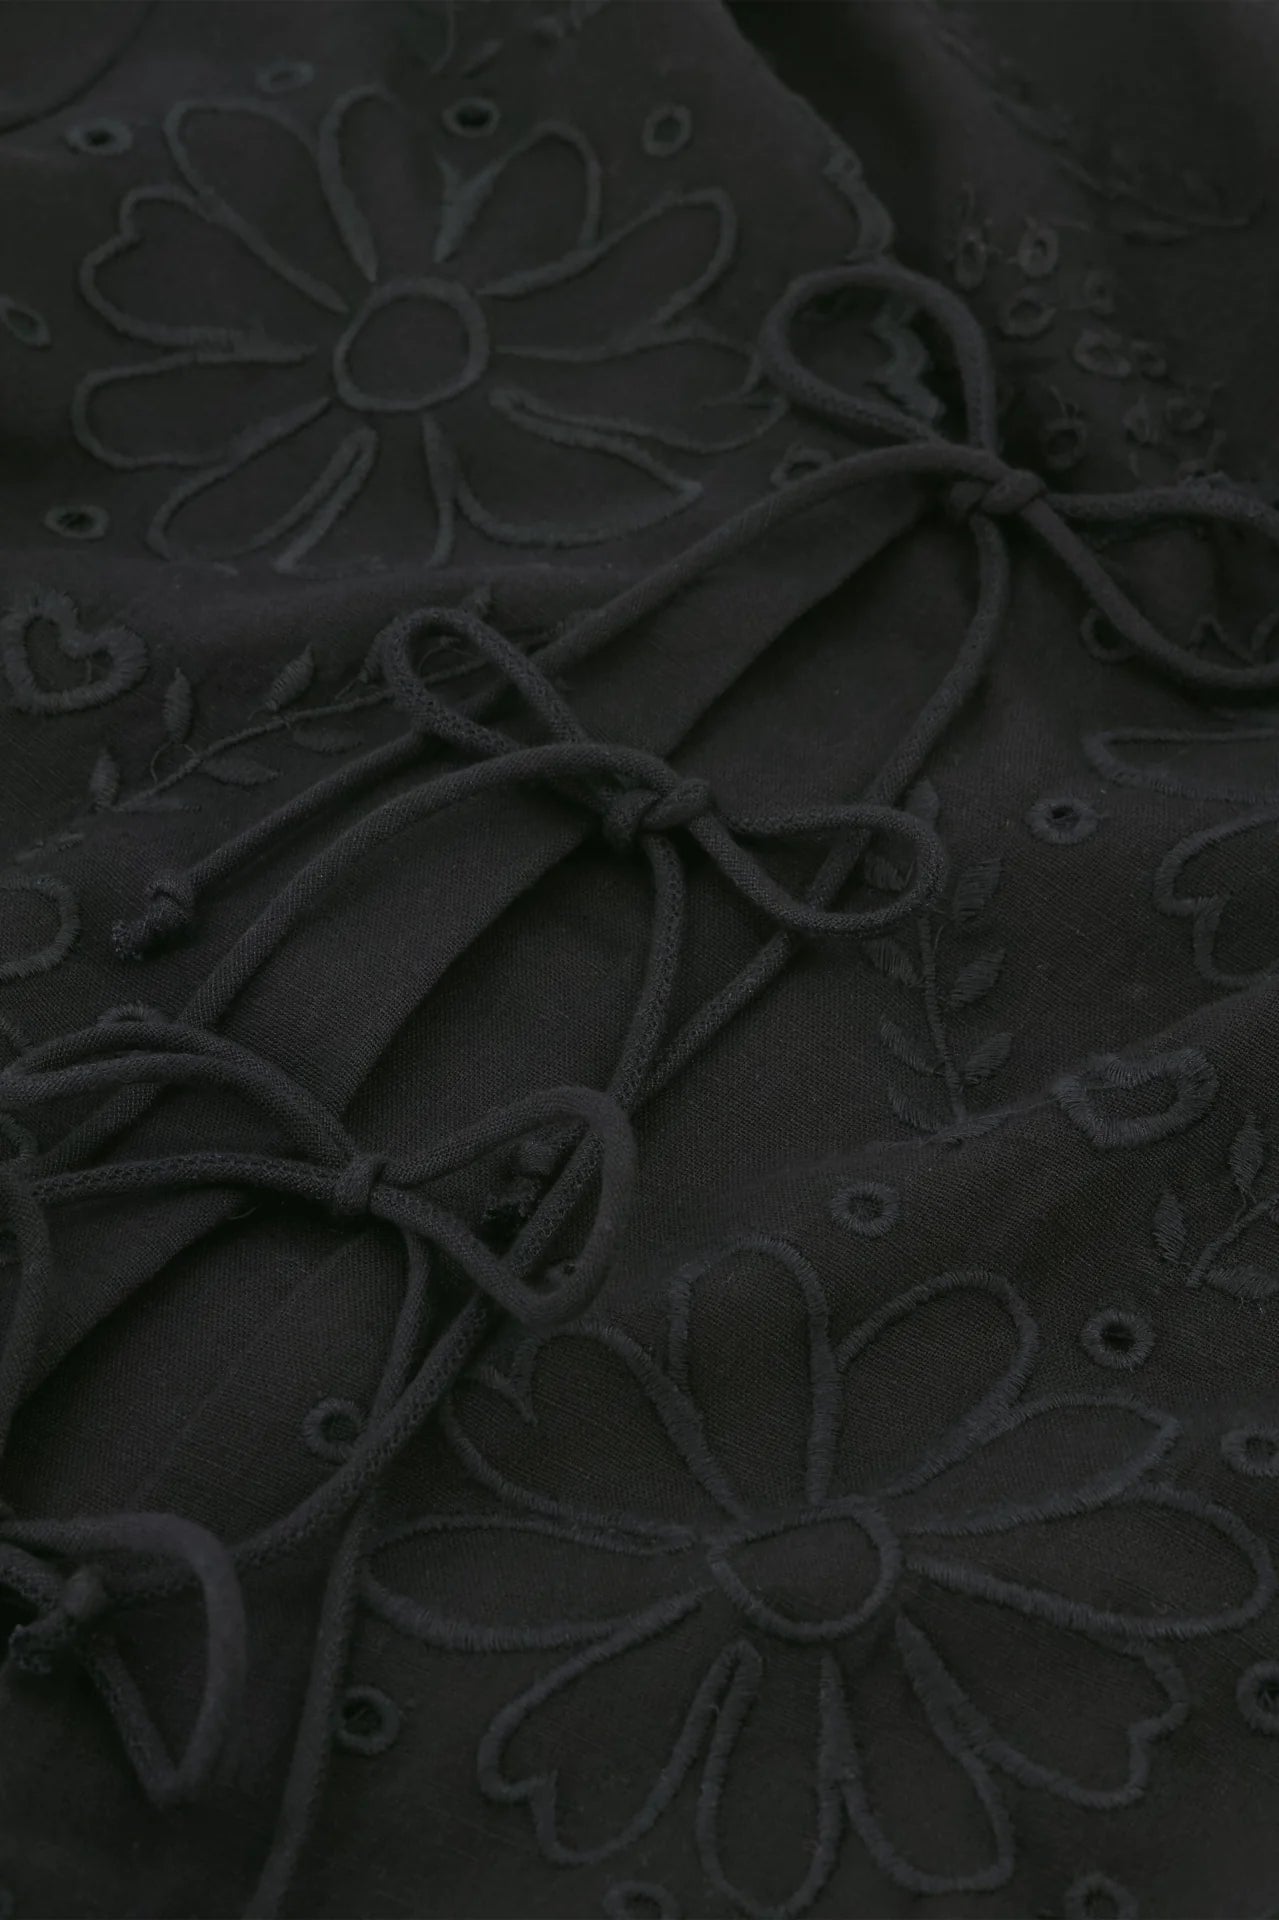 A close up of the Fabienne Chapot Sterre Top - Black embroidered with flowers.